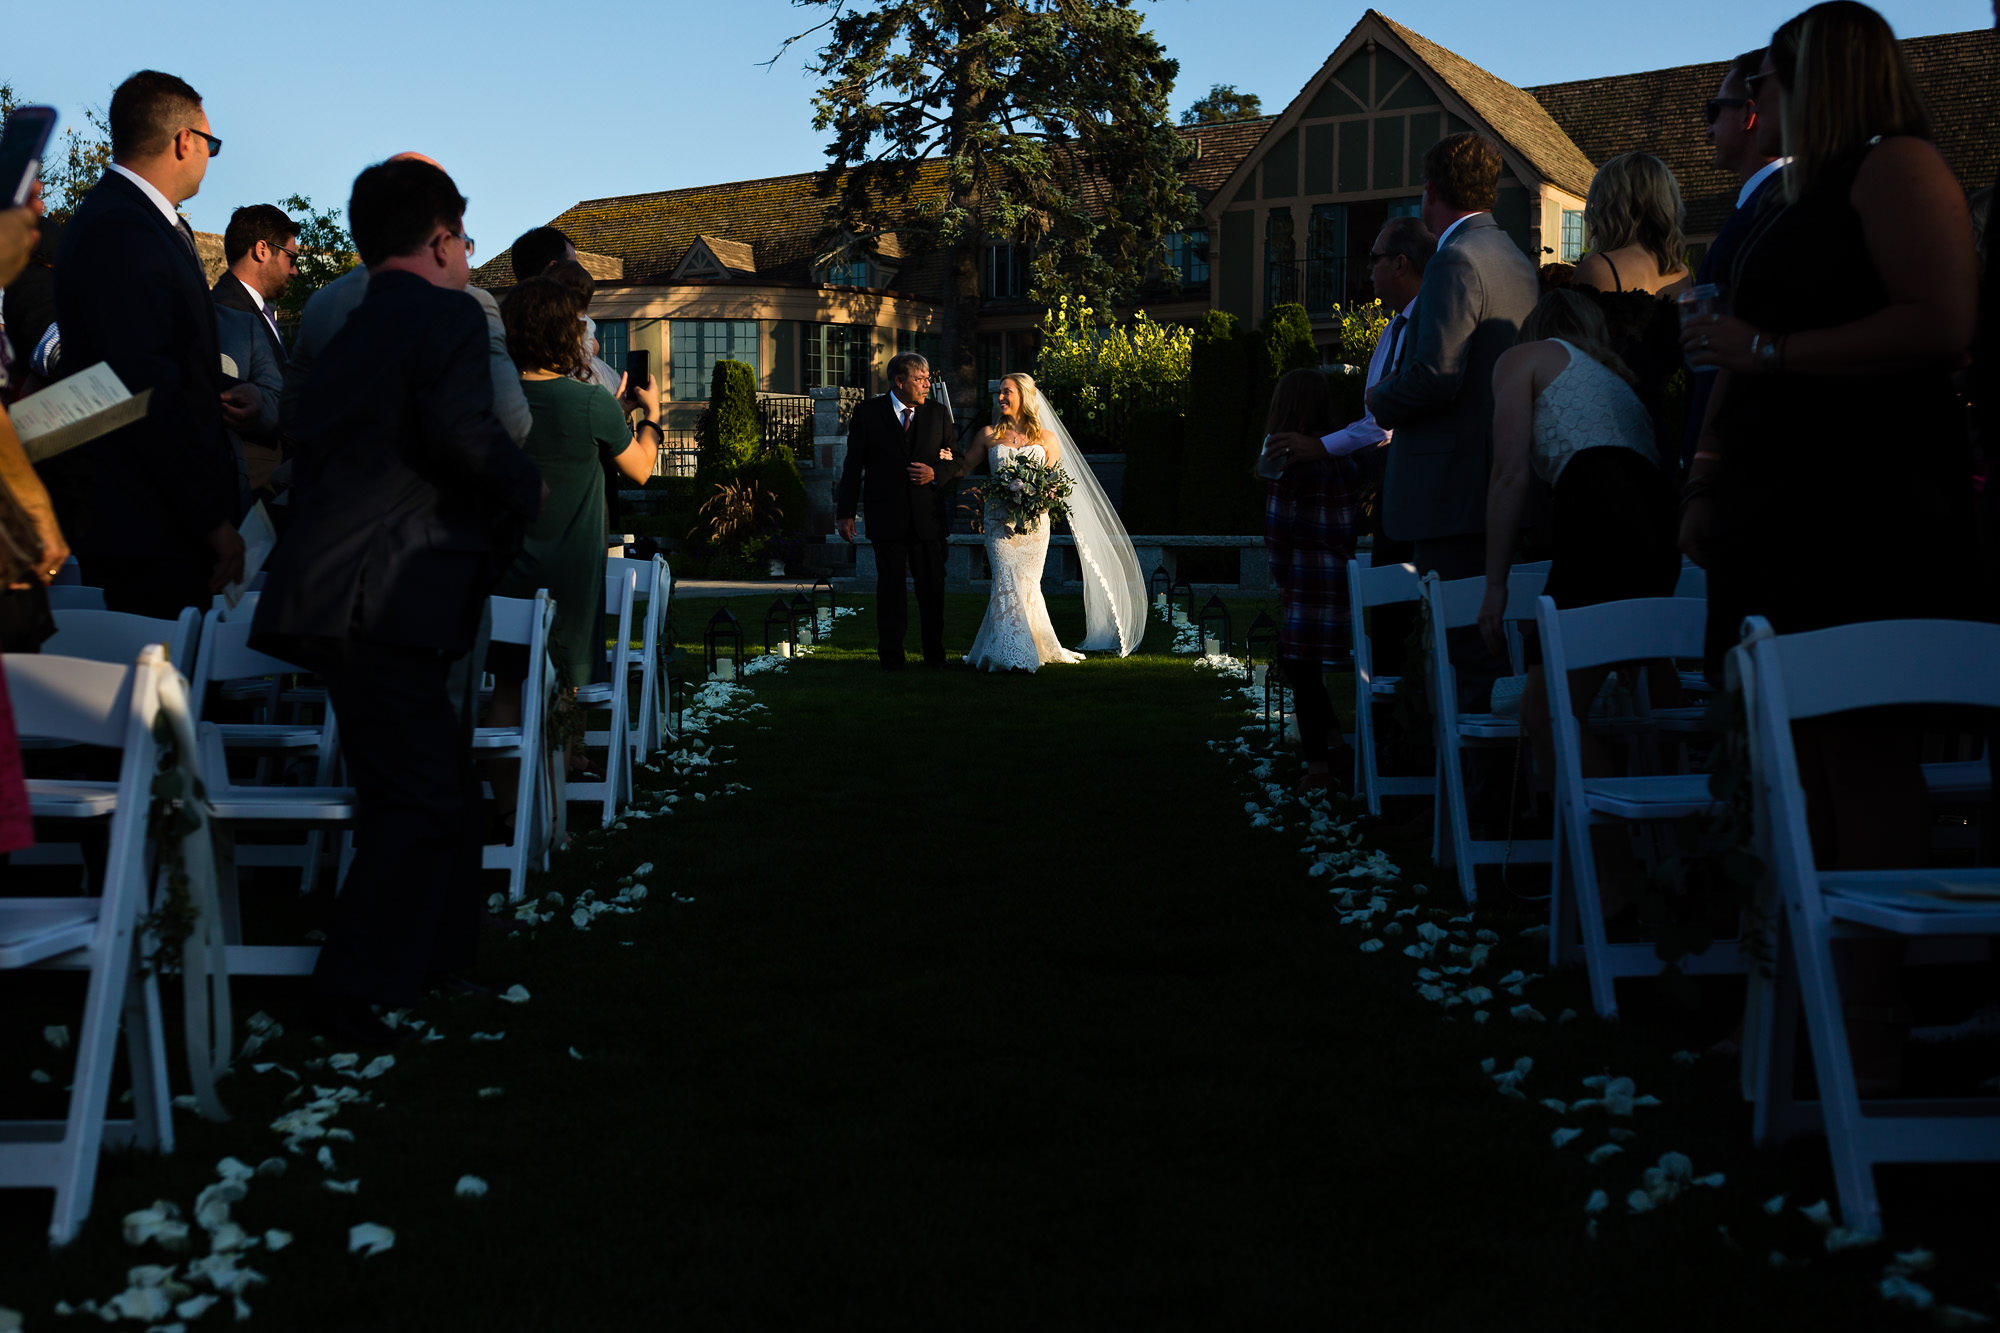 The bride walks down the aisle at her Bar Harbor Club wedding ceremony